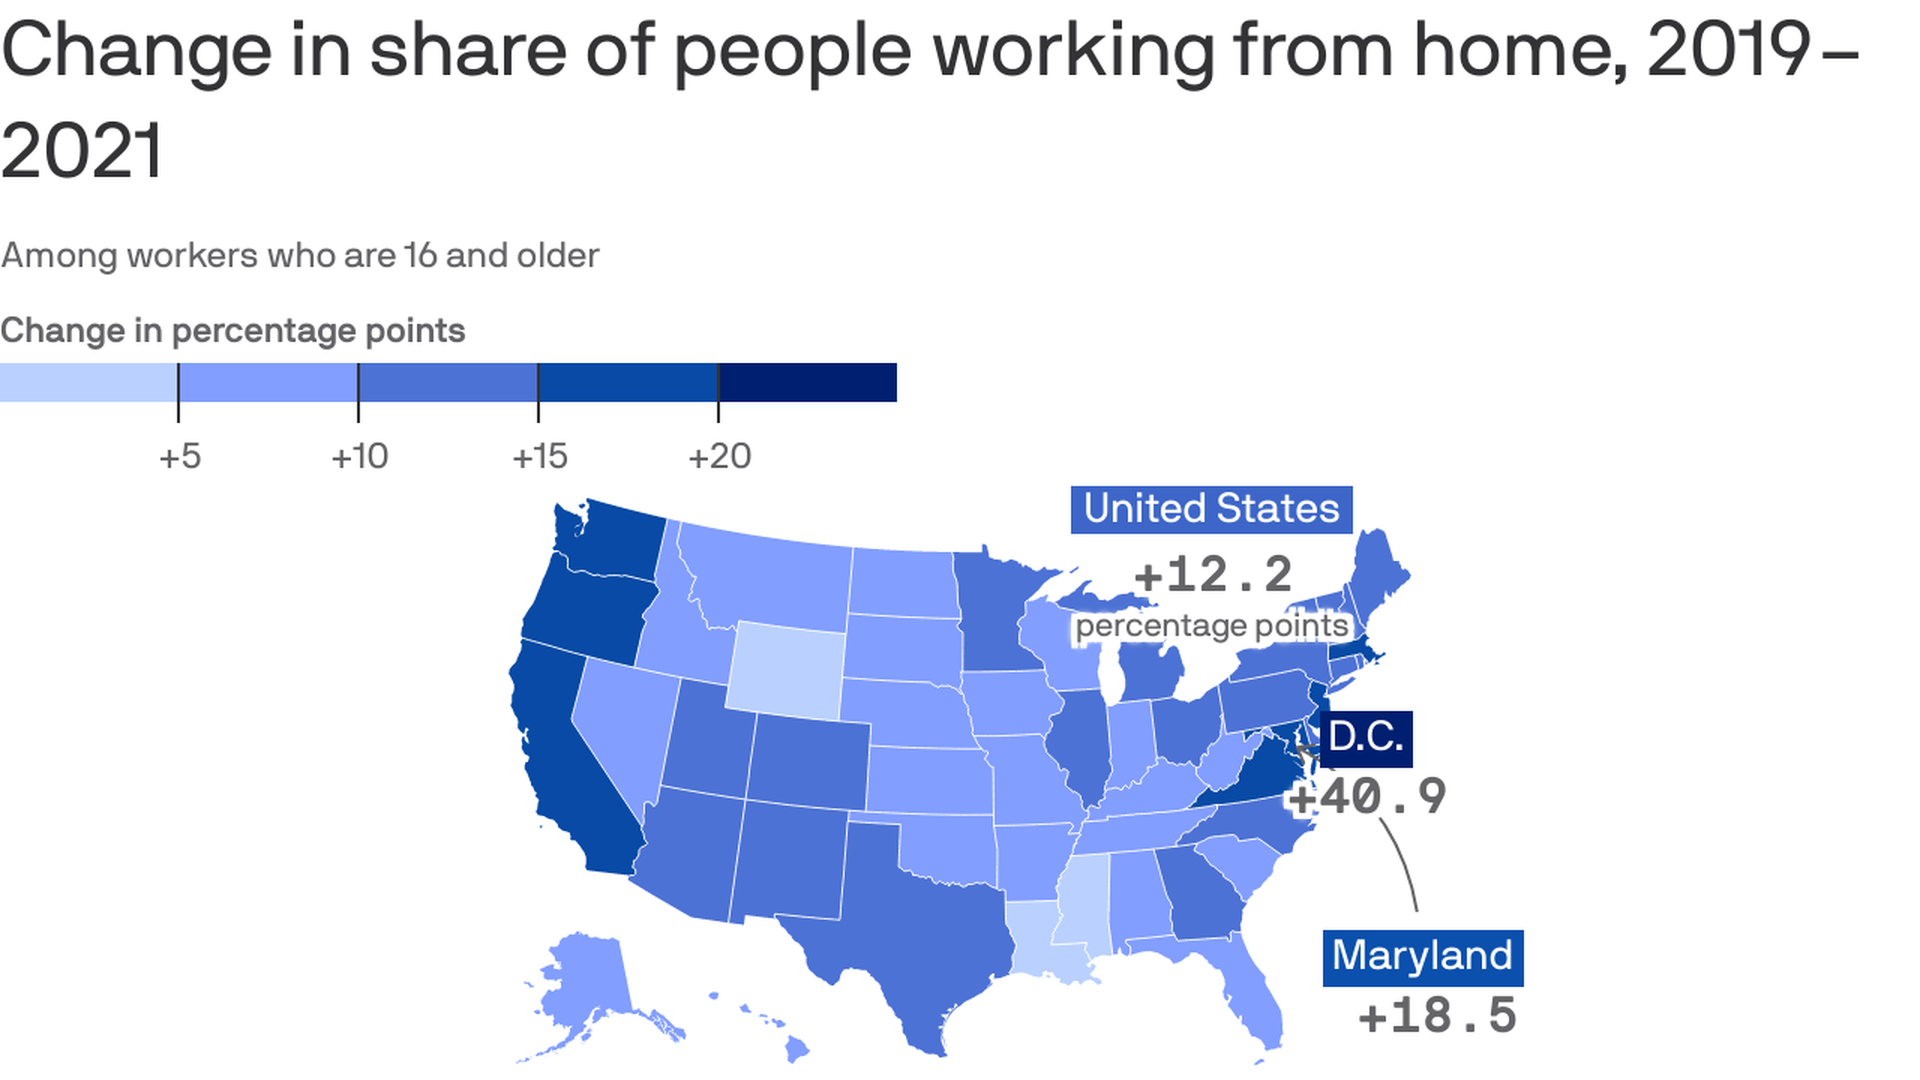 A U.S. map of the change in share of people working from home. 